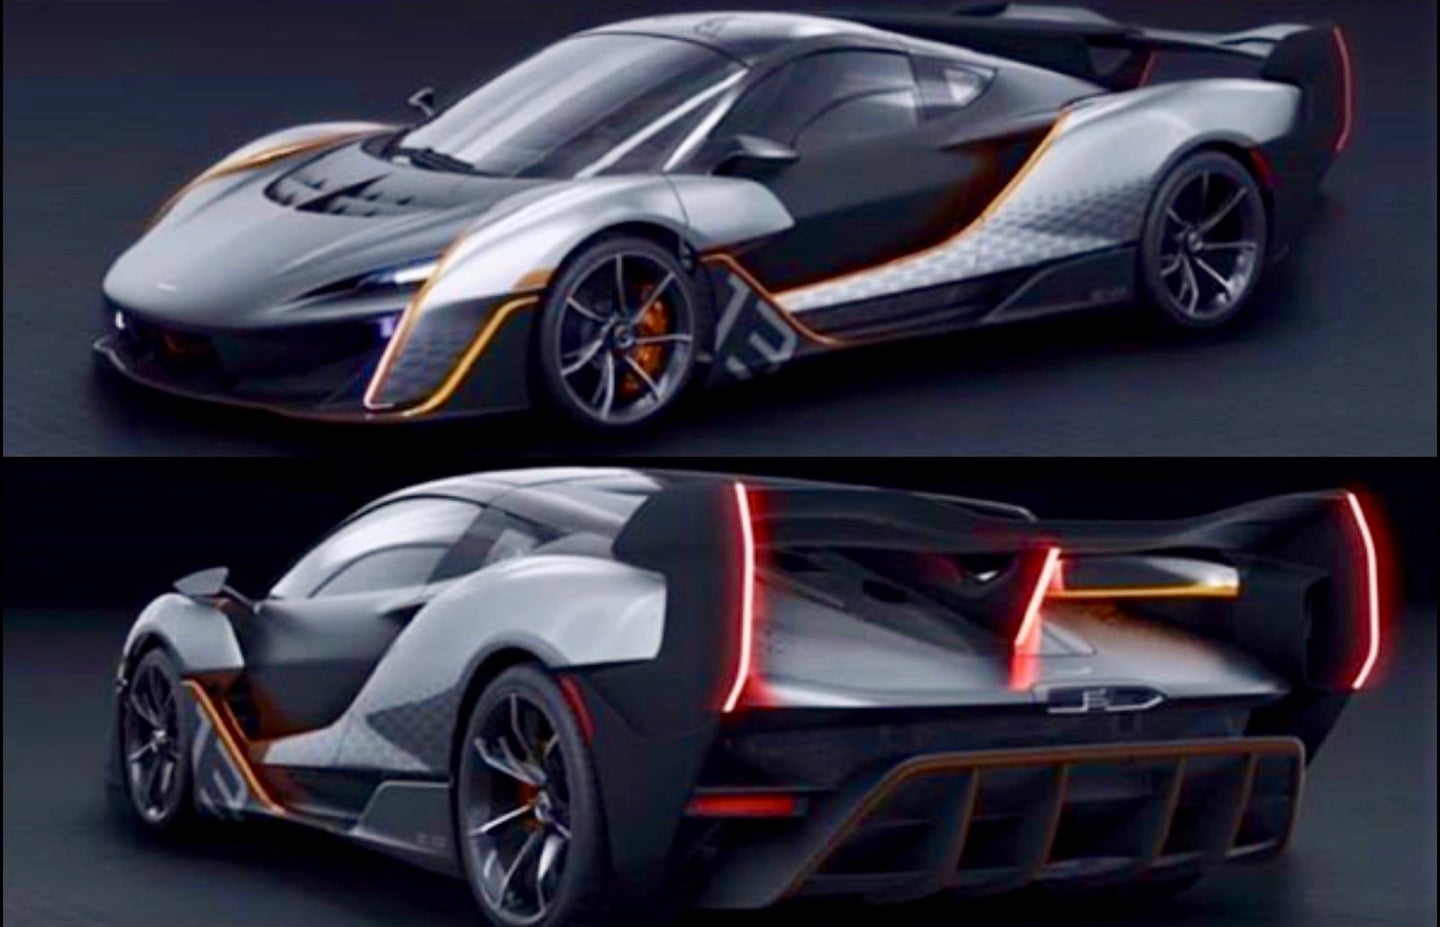 A New McLaren Supercar Might Have Just Leaked on Instagram